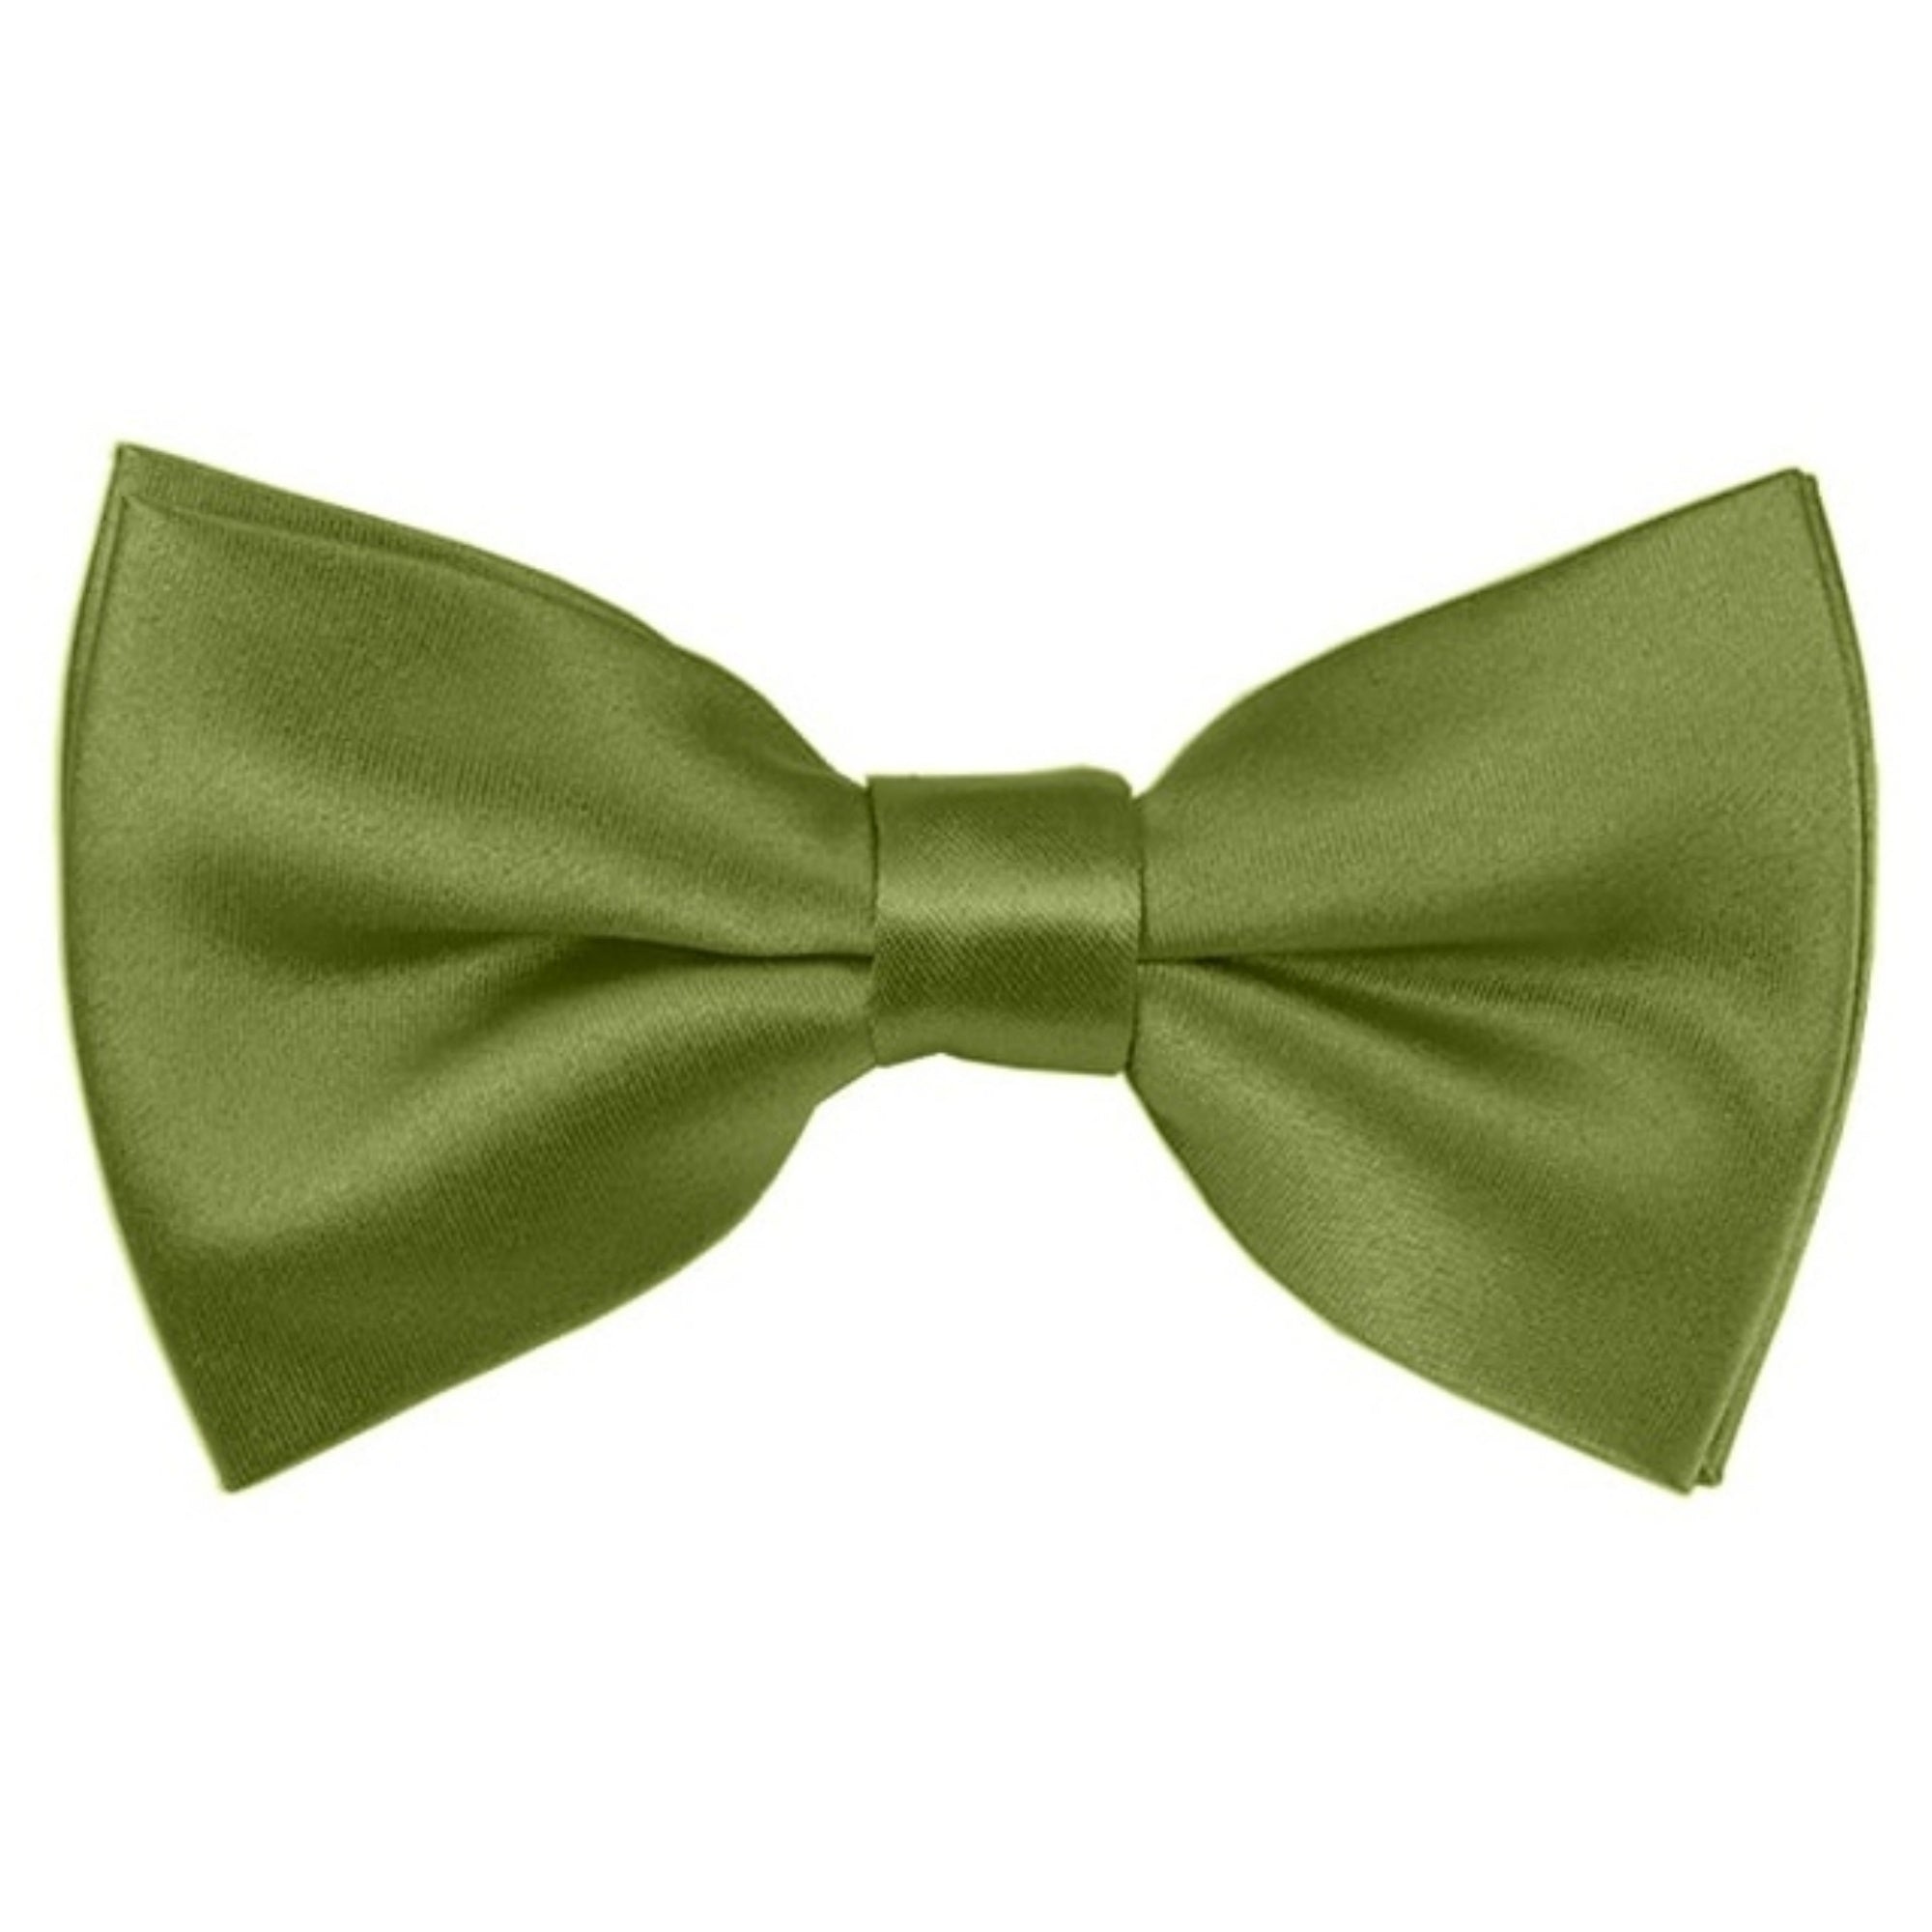 TheDapperTie Men's Solid Color 2.5 W And 4.5 L Inch Pre-Tied adjustable Bow Ties Men's Solid Color Bow Tie TheDapperTie Olive Green  